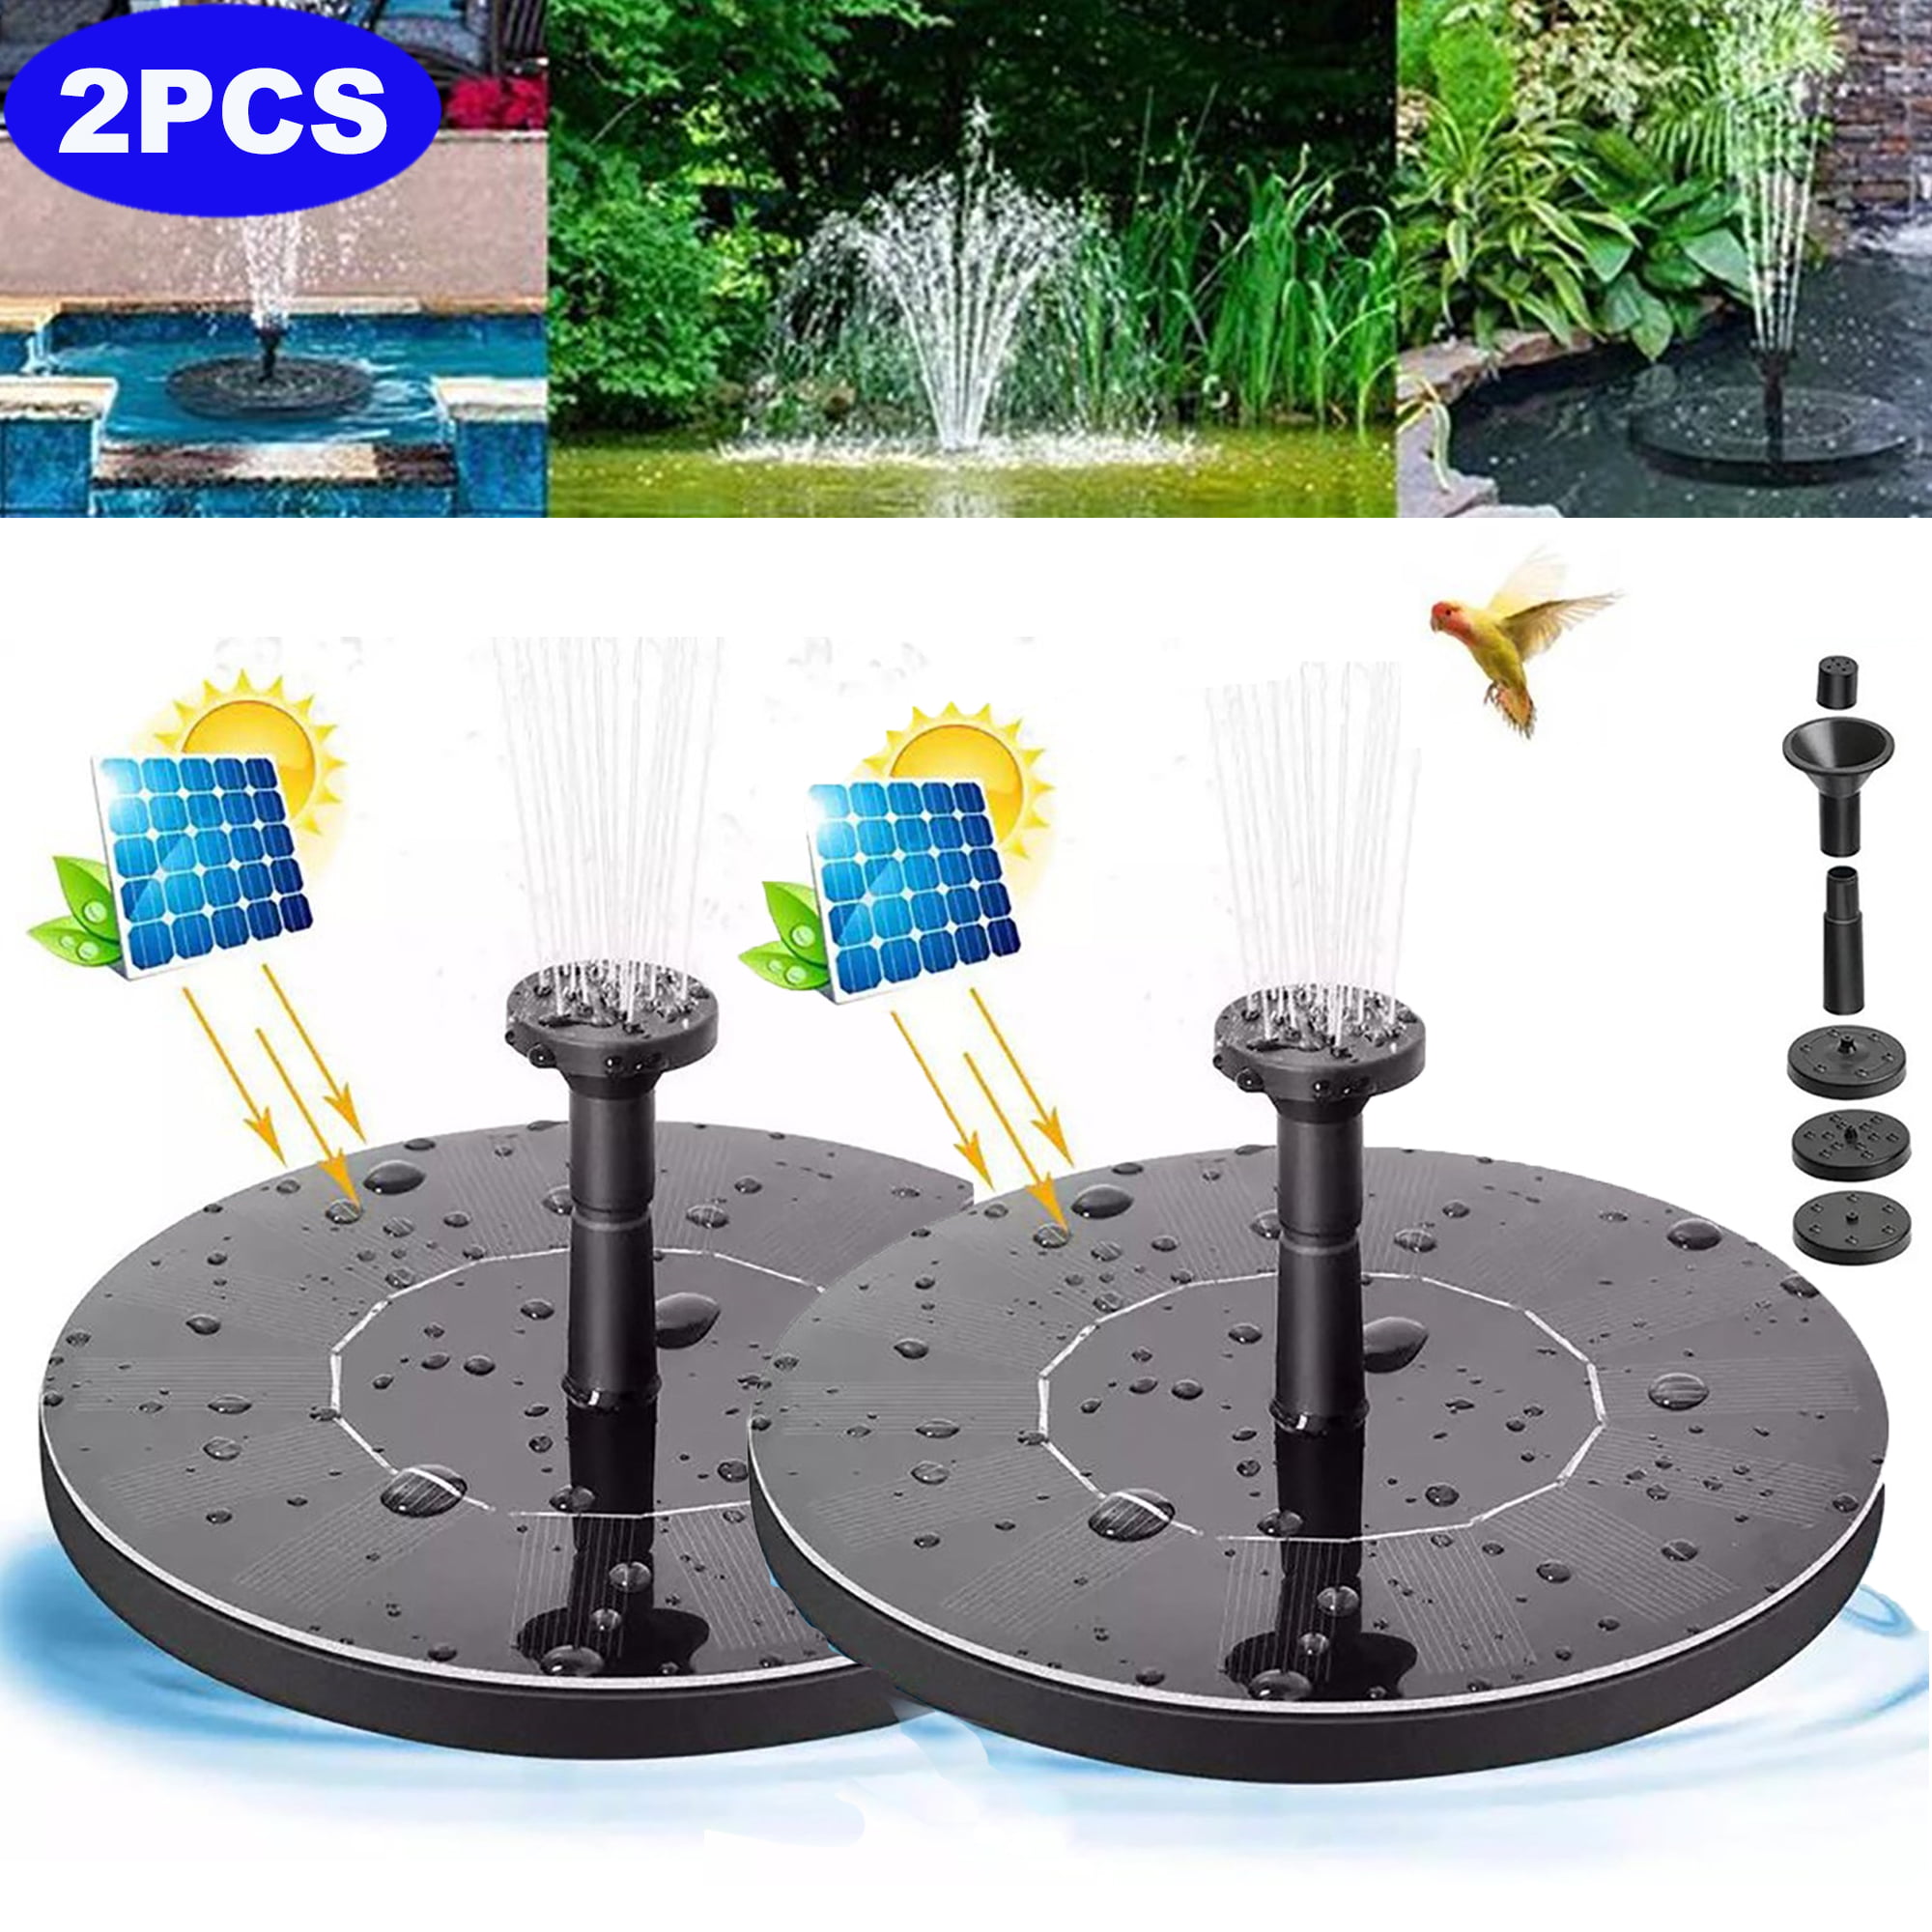 Solar Bird Bath Fountain,Innovative Outdoor Floating Fountain with 6 Nozzle,Free Standing Solar Powered Water Fountain Pump with Water Level Monitoring for Garden Pool Pond